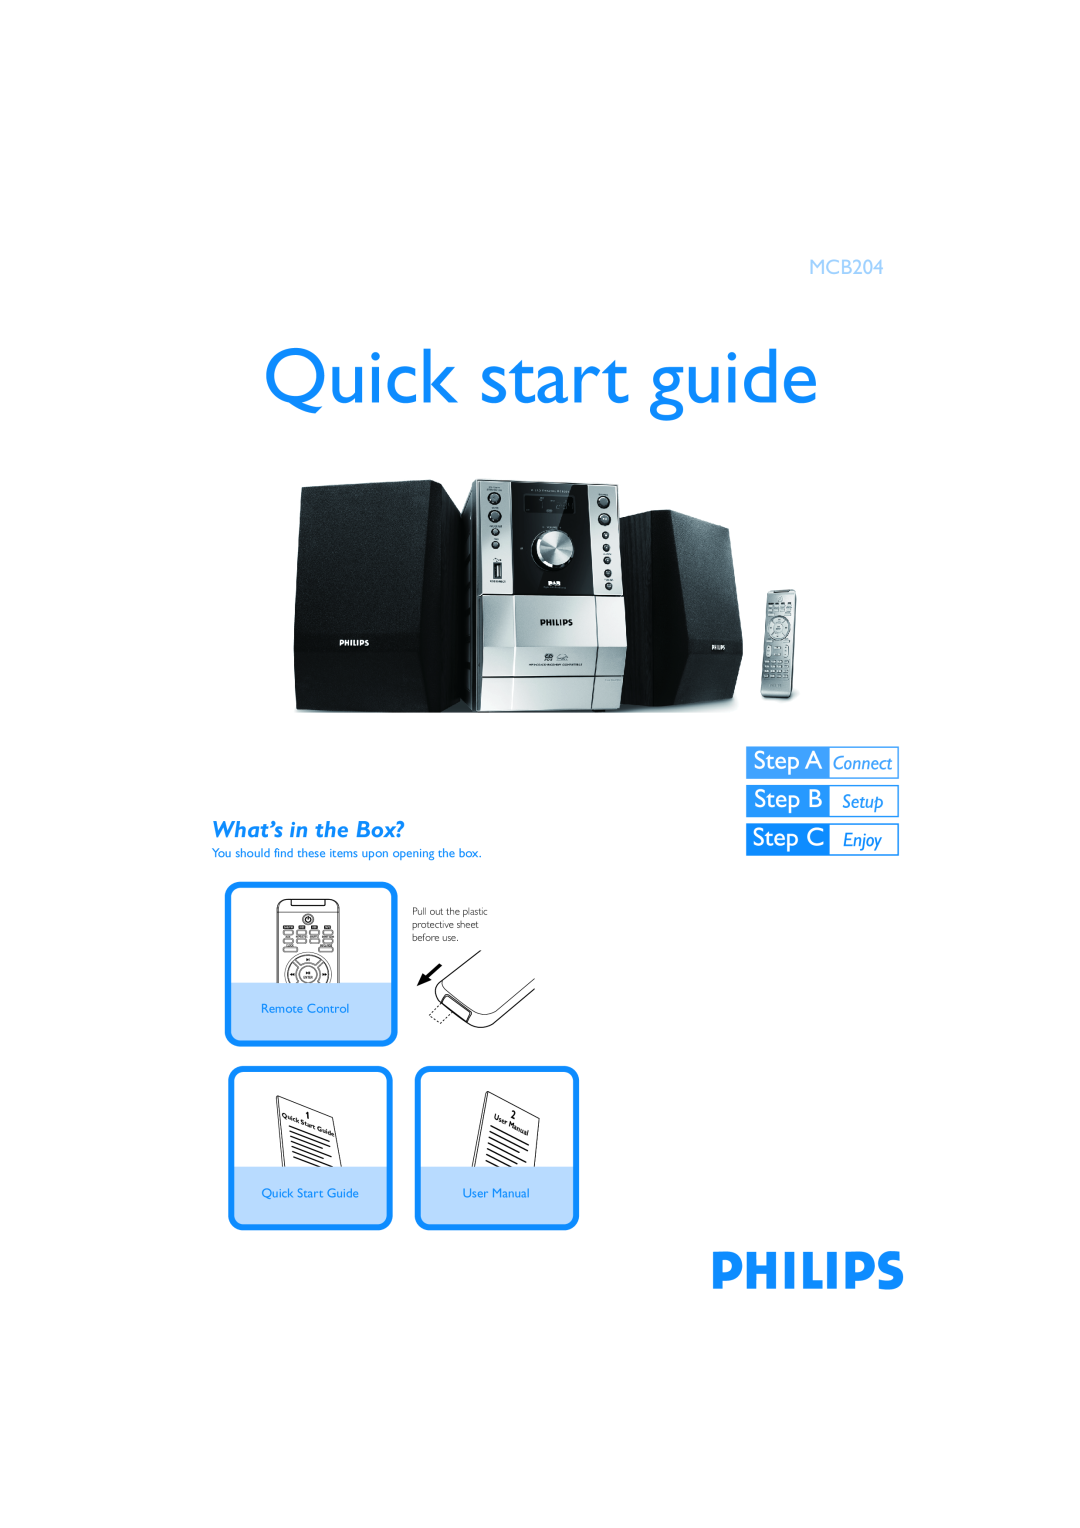 Philips MCB204 quick start Quick start guide, What’s in the Box?, You should find these items upon opening the box, Guide 